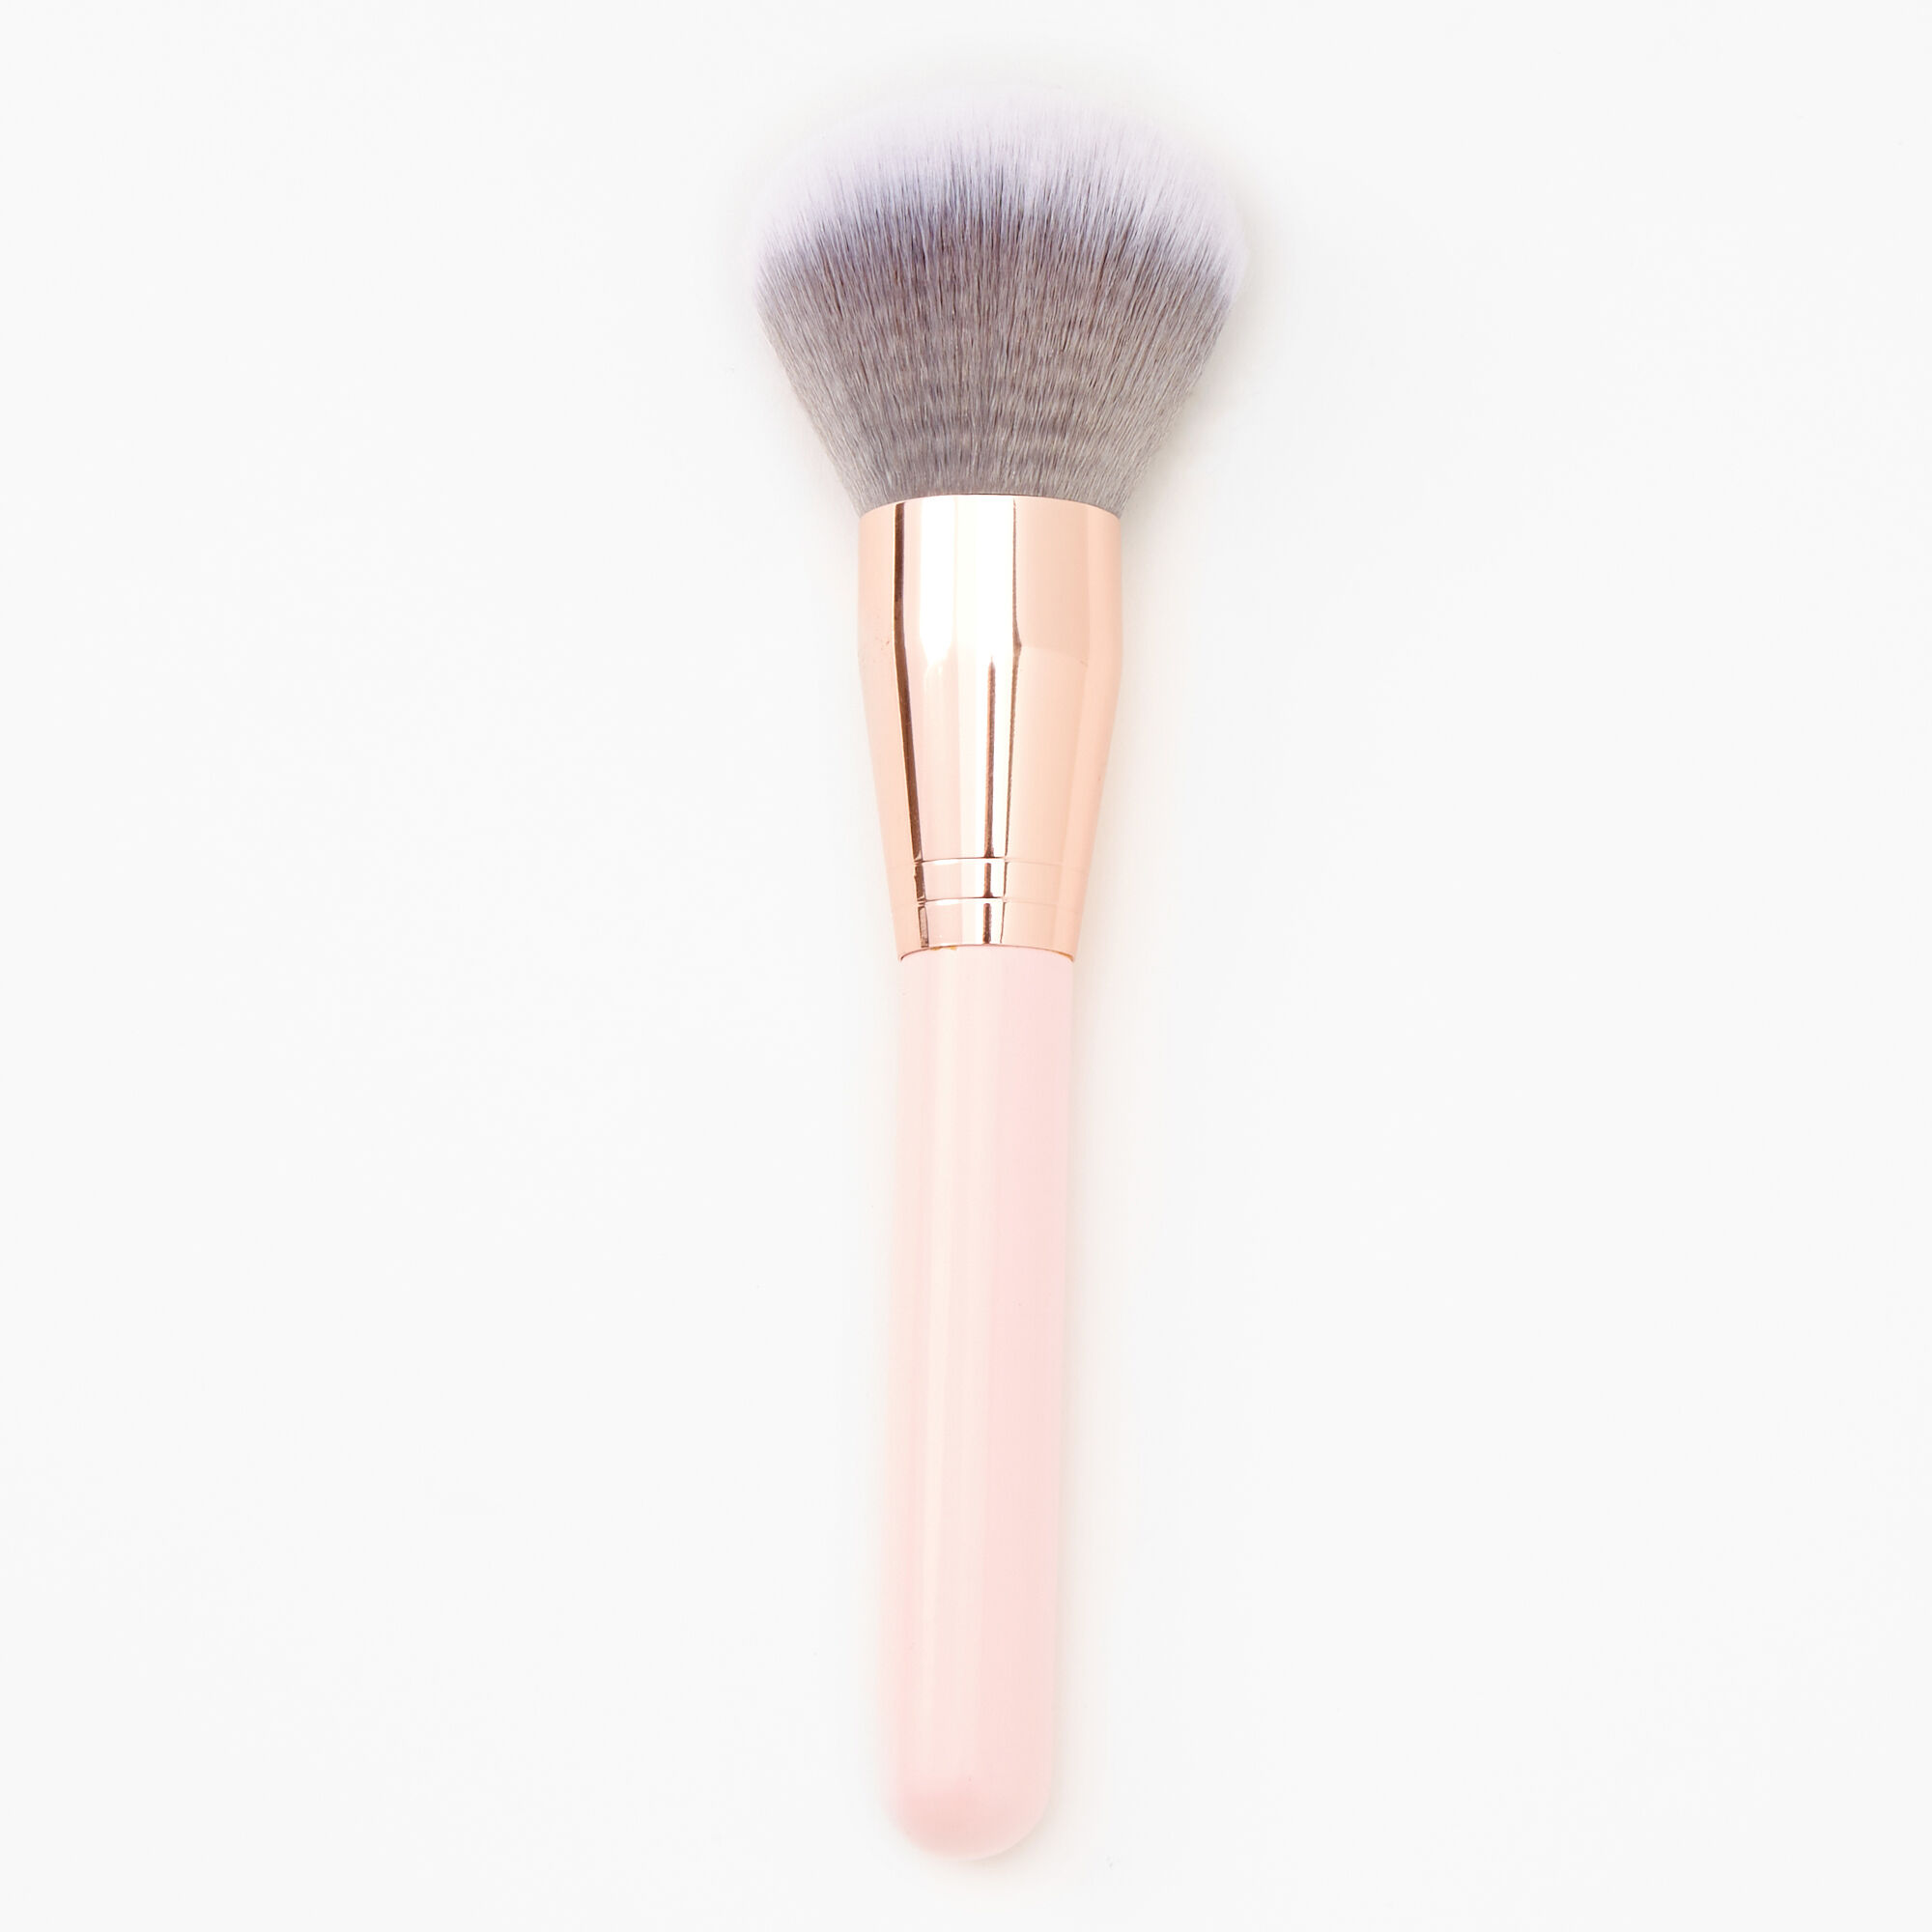 View Claires Rose Gold Face Powder Makeup Brush Pink information